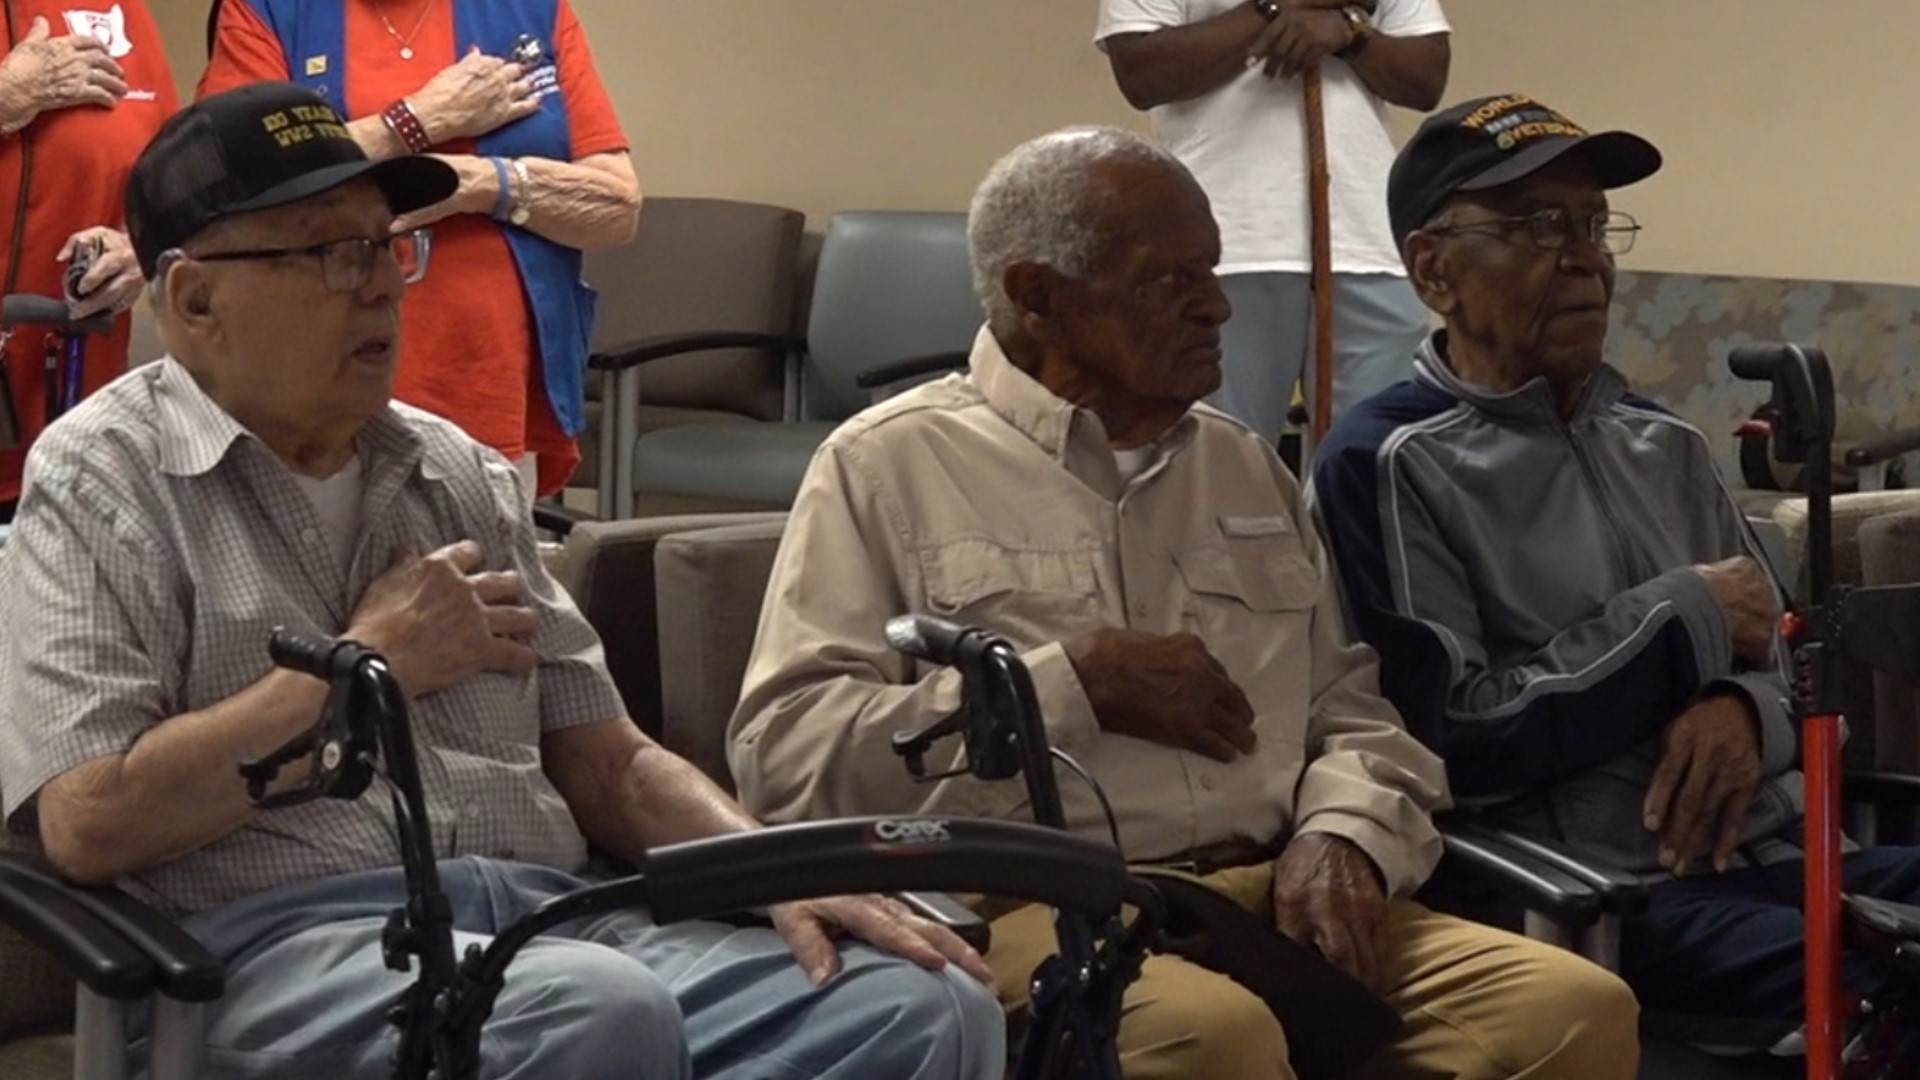 Sam Daleo, 100, Ivory Joubert, 100 and Louis Scott, 102, were given certificates of recognition from Congressman Brian Babin and Congressman Randy Weber.